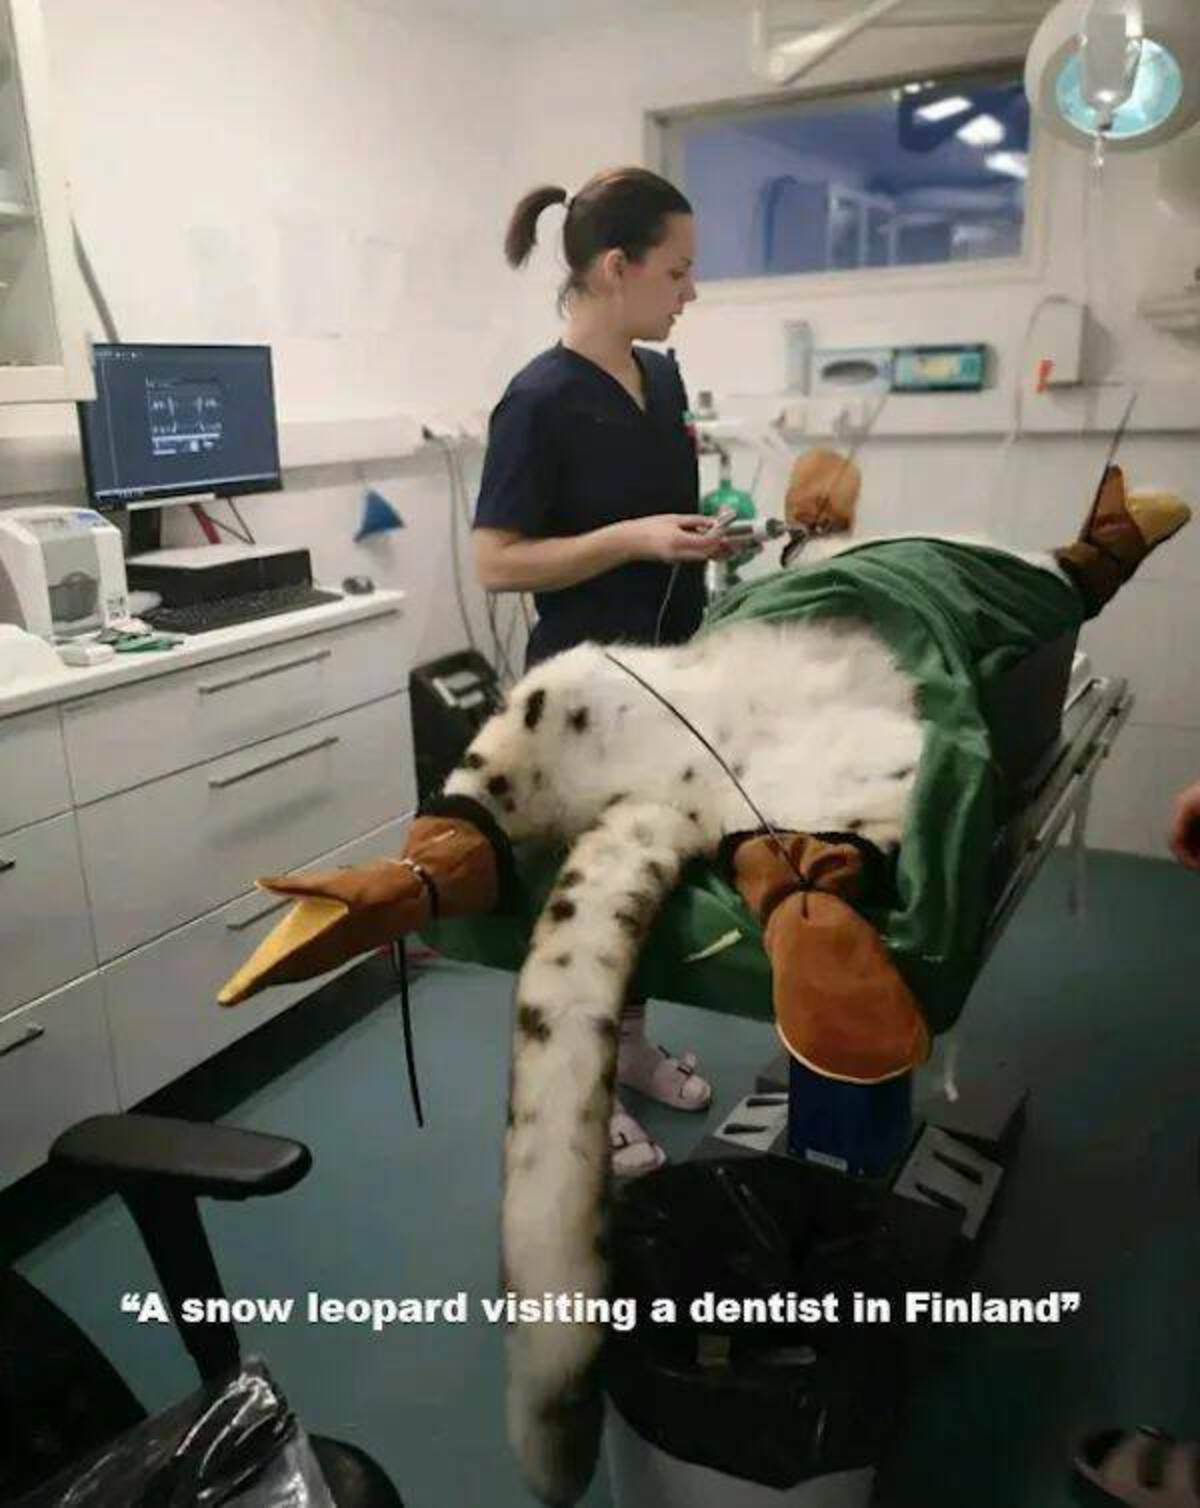 arm - "A snow leopard visiting a dentist in Finland"